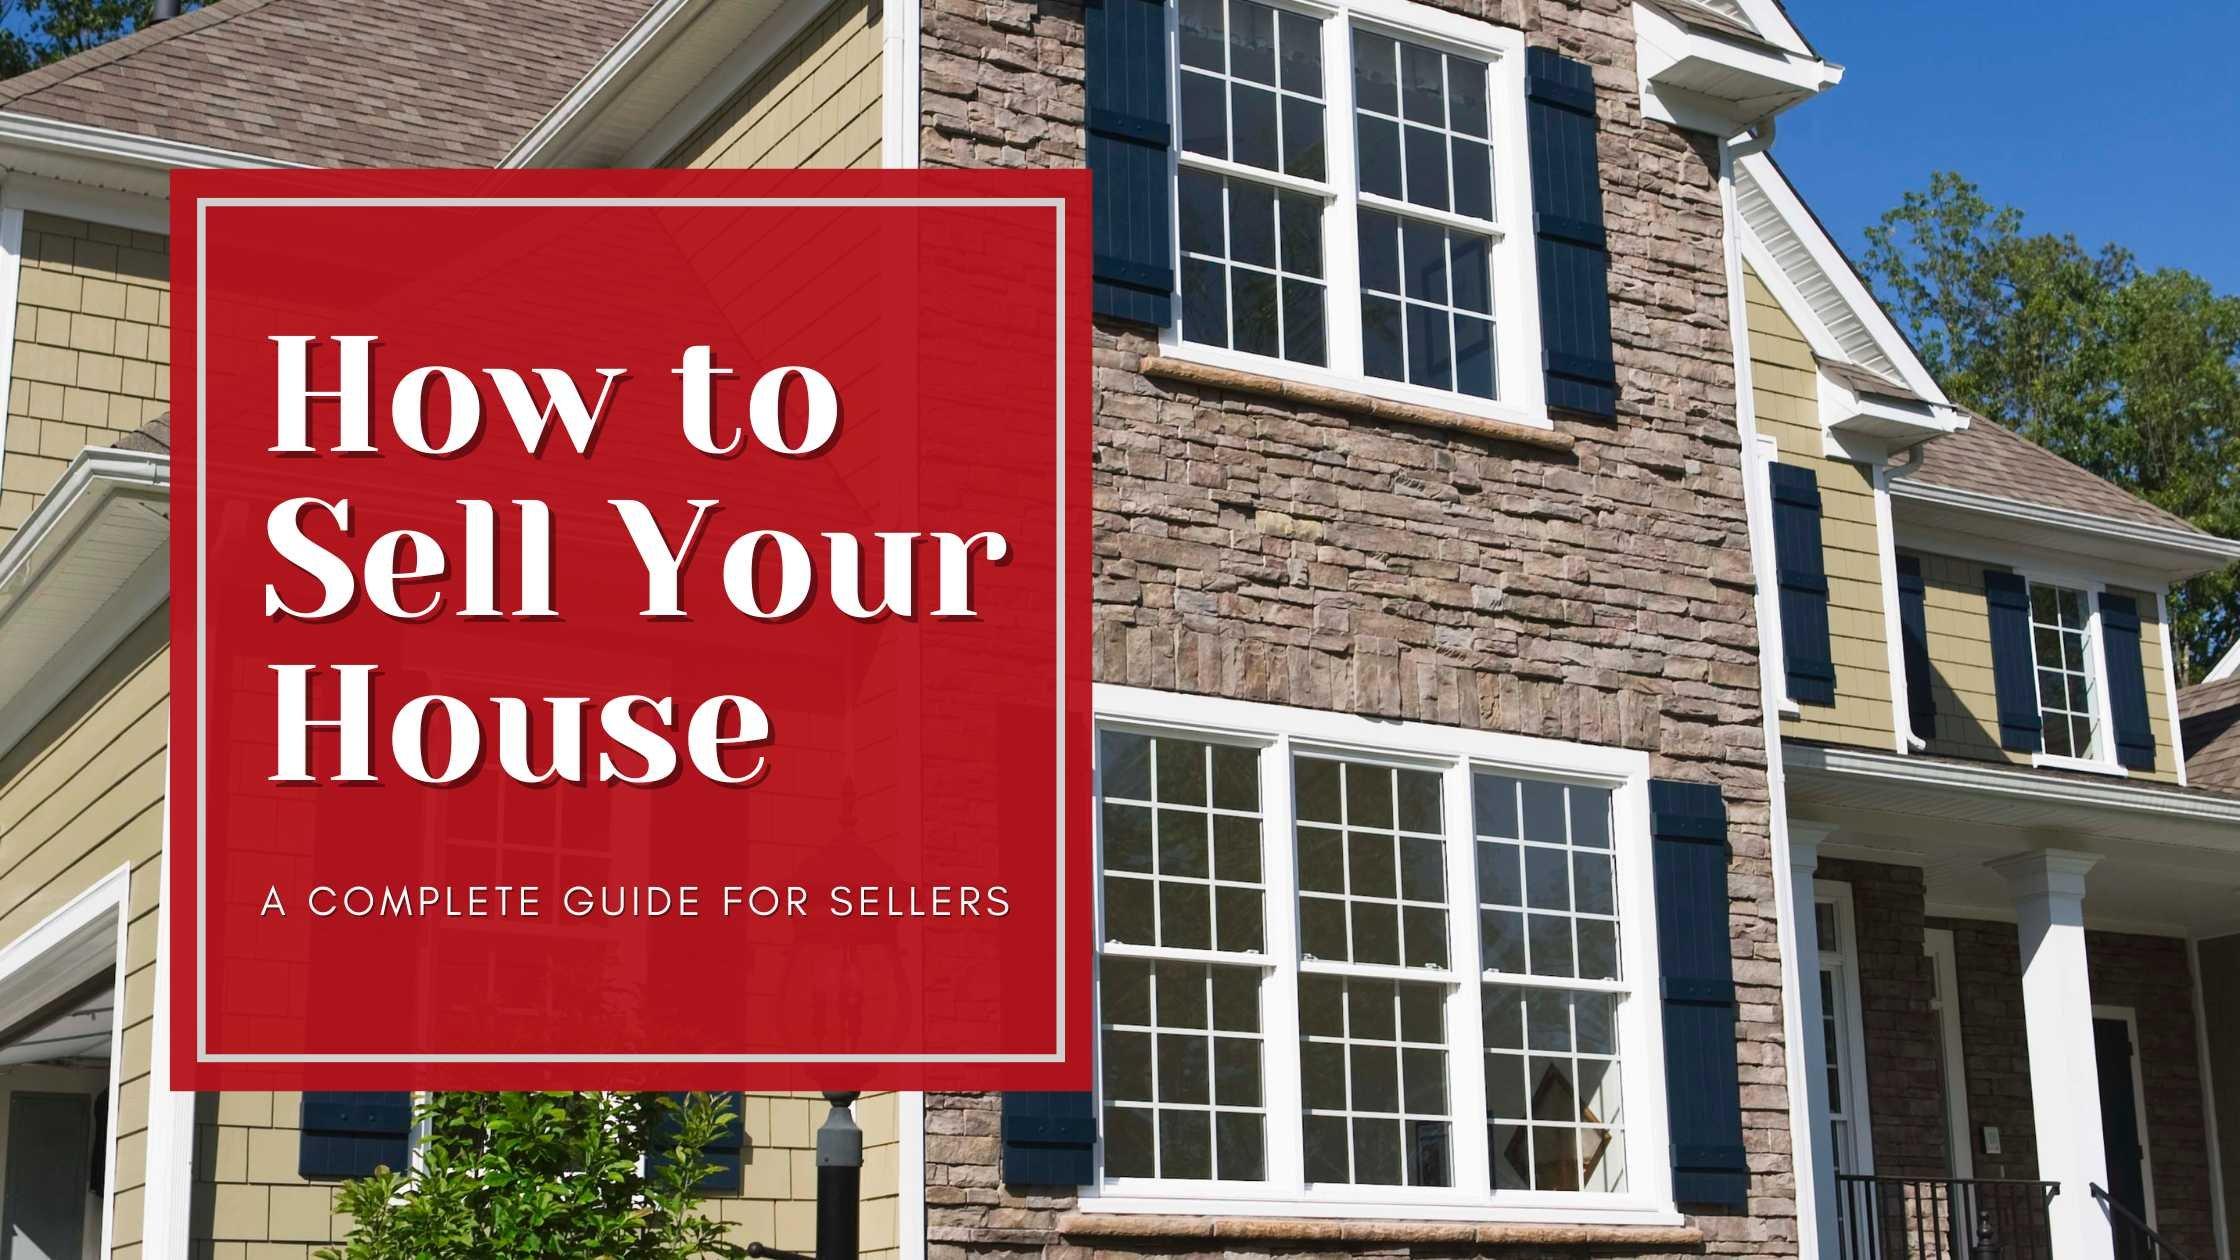 How to Sell Your House: A Complete Guide for Sellers in Houston